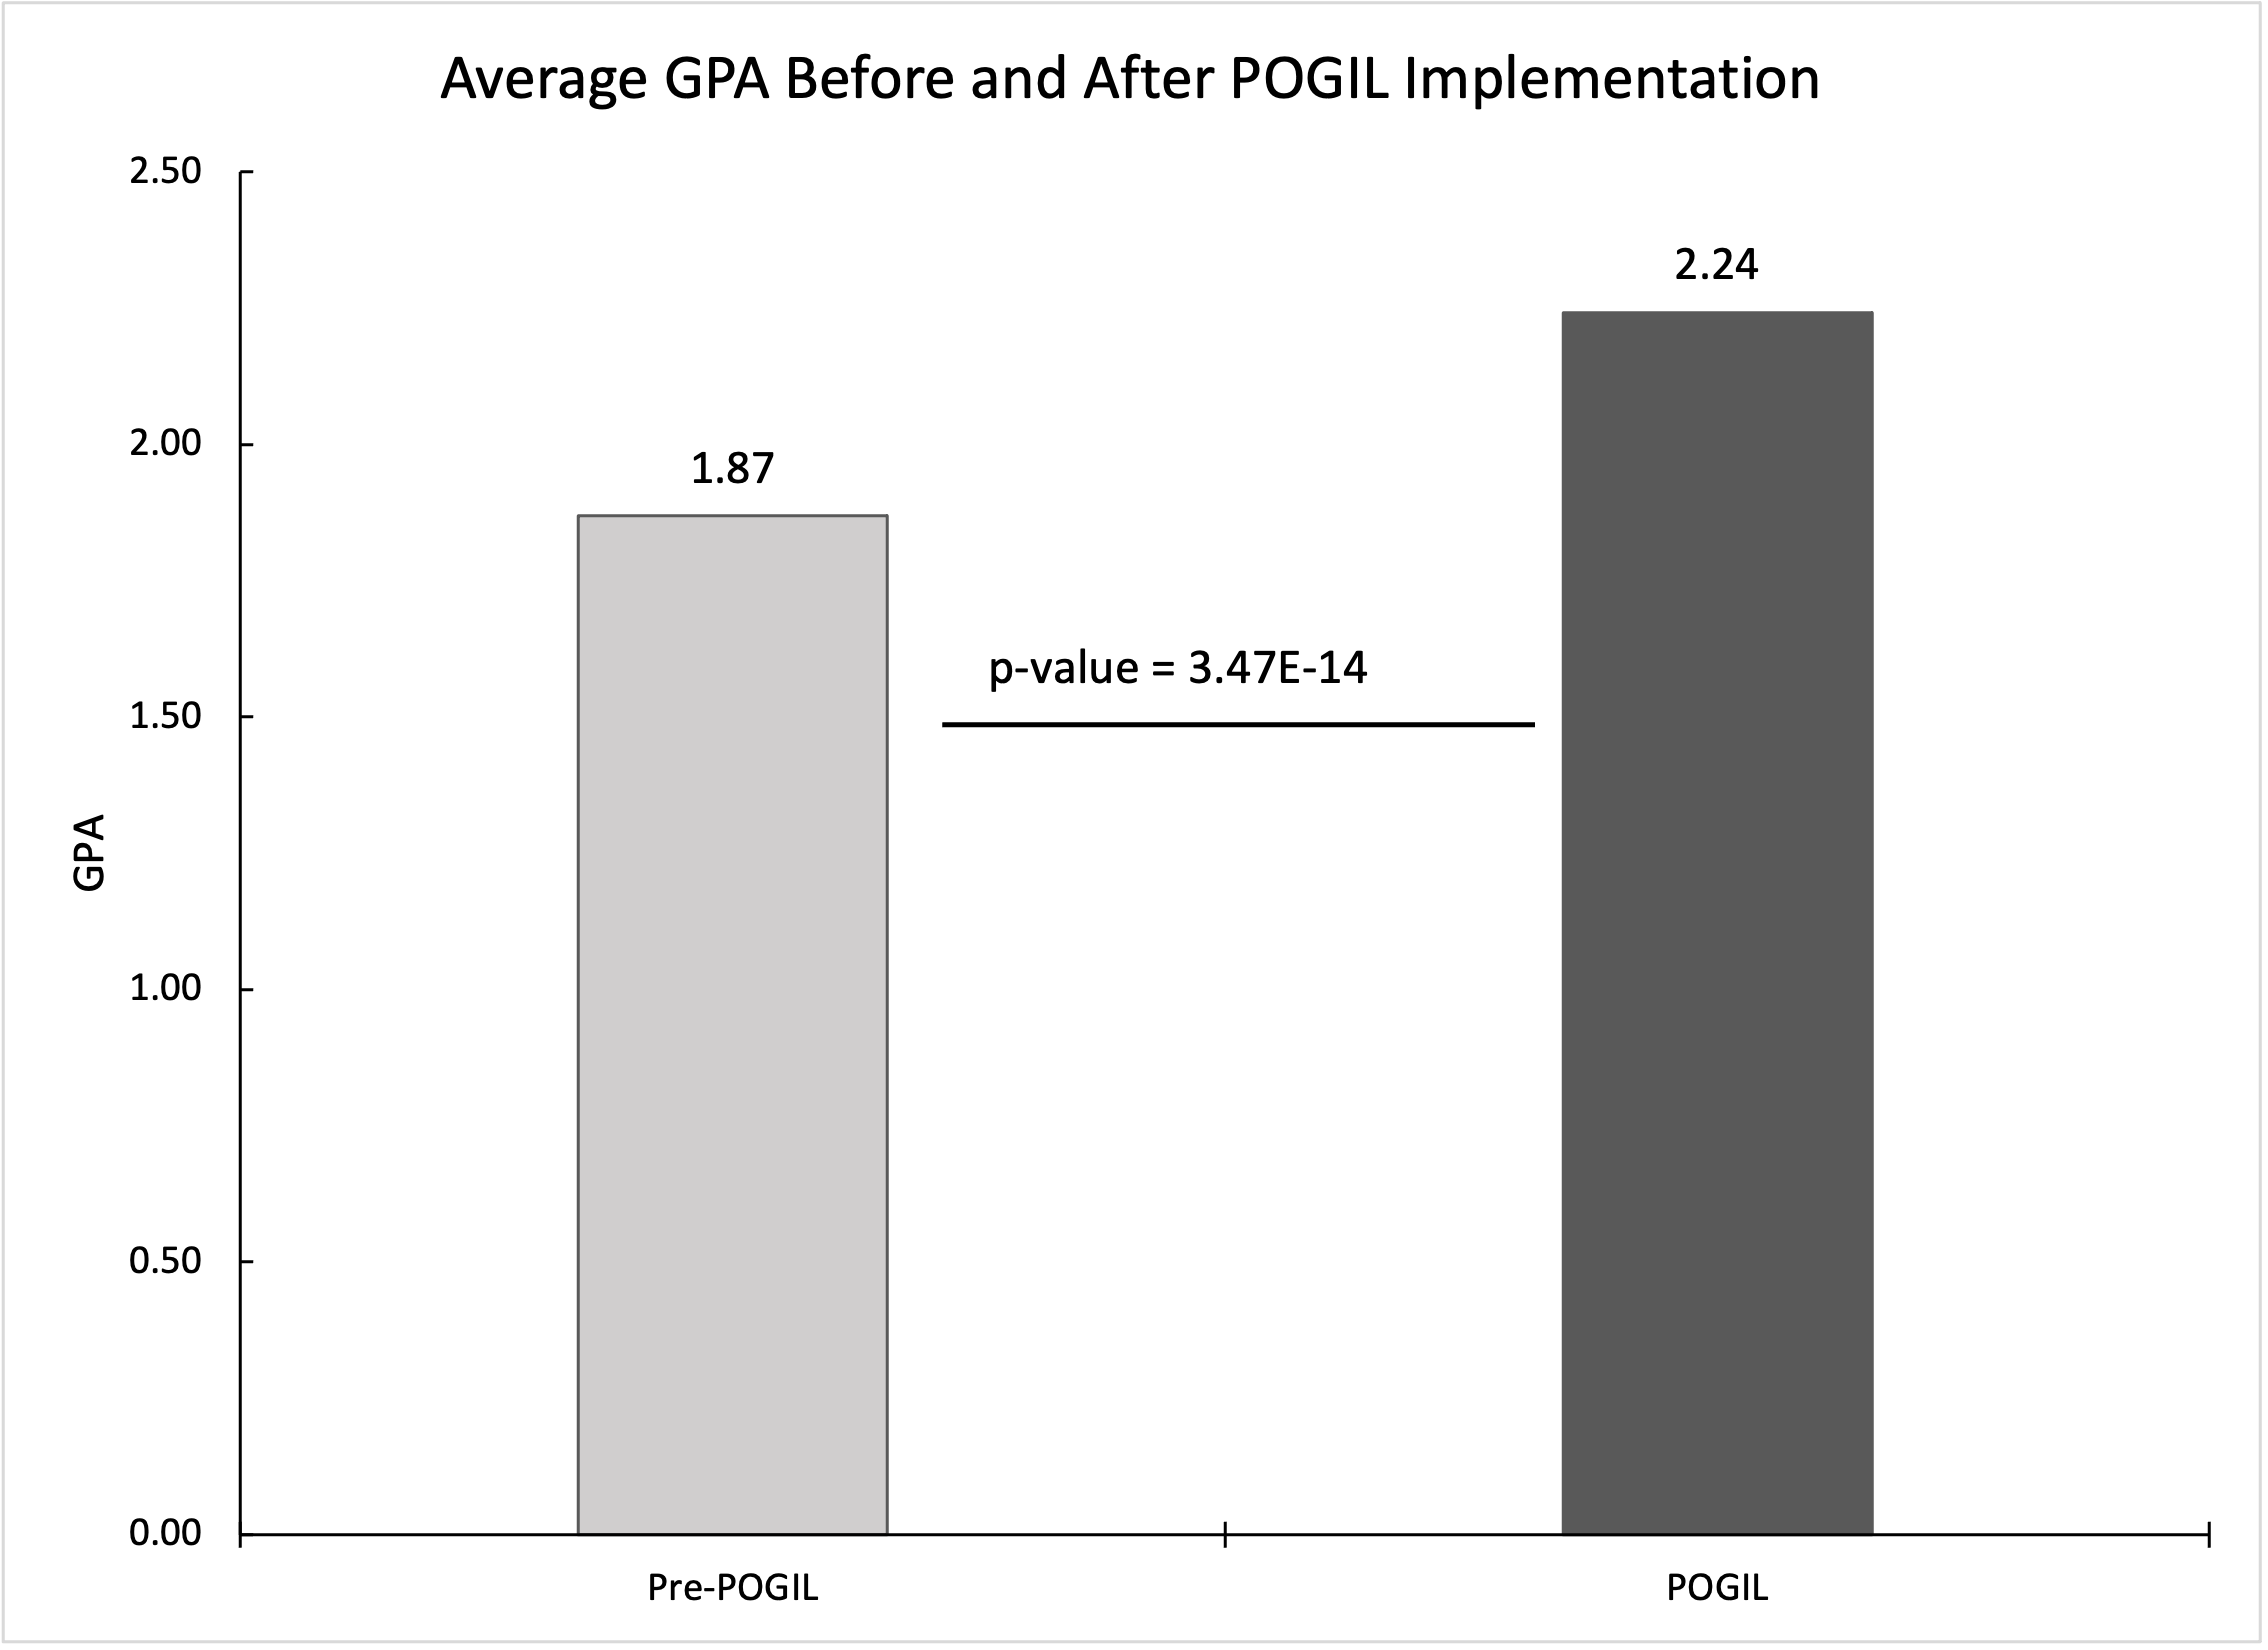 Showcase Image for Statistical Analysis in a Longitudinal Study of the Implementation of POGIL at Norwich University